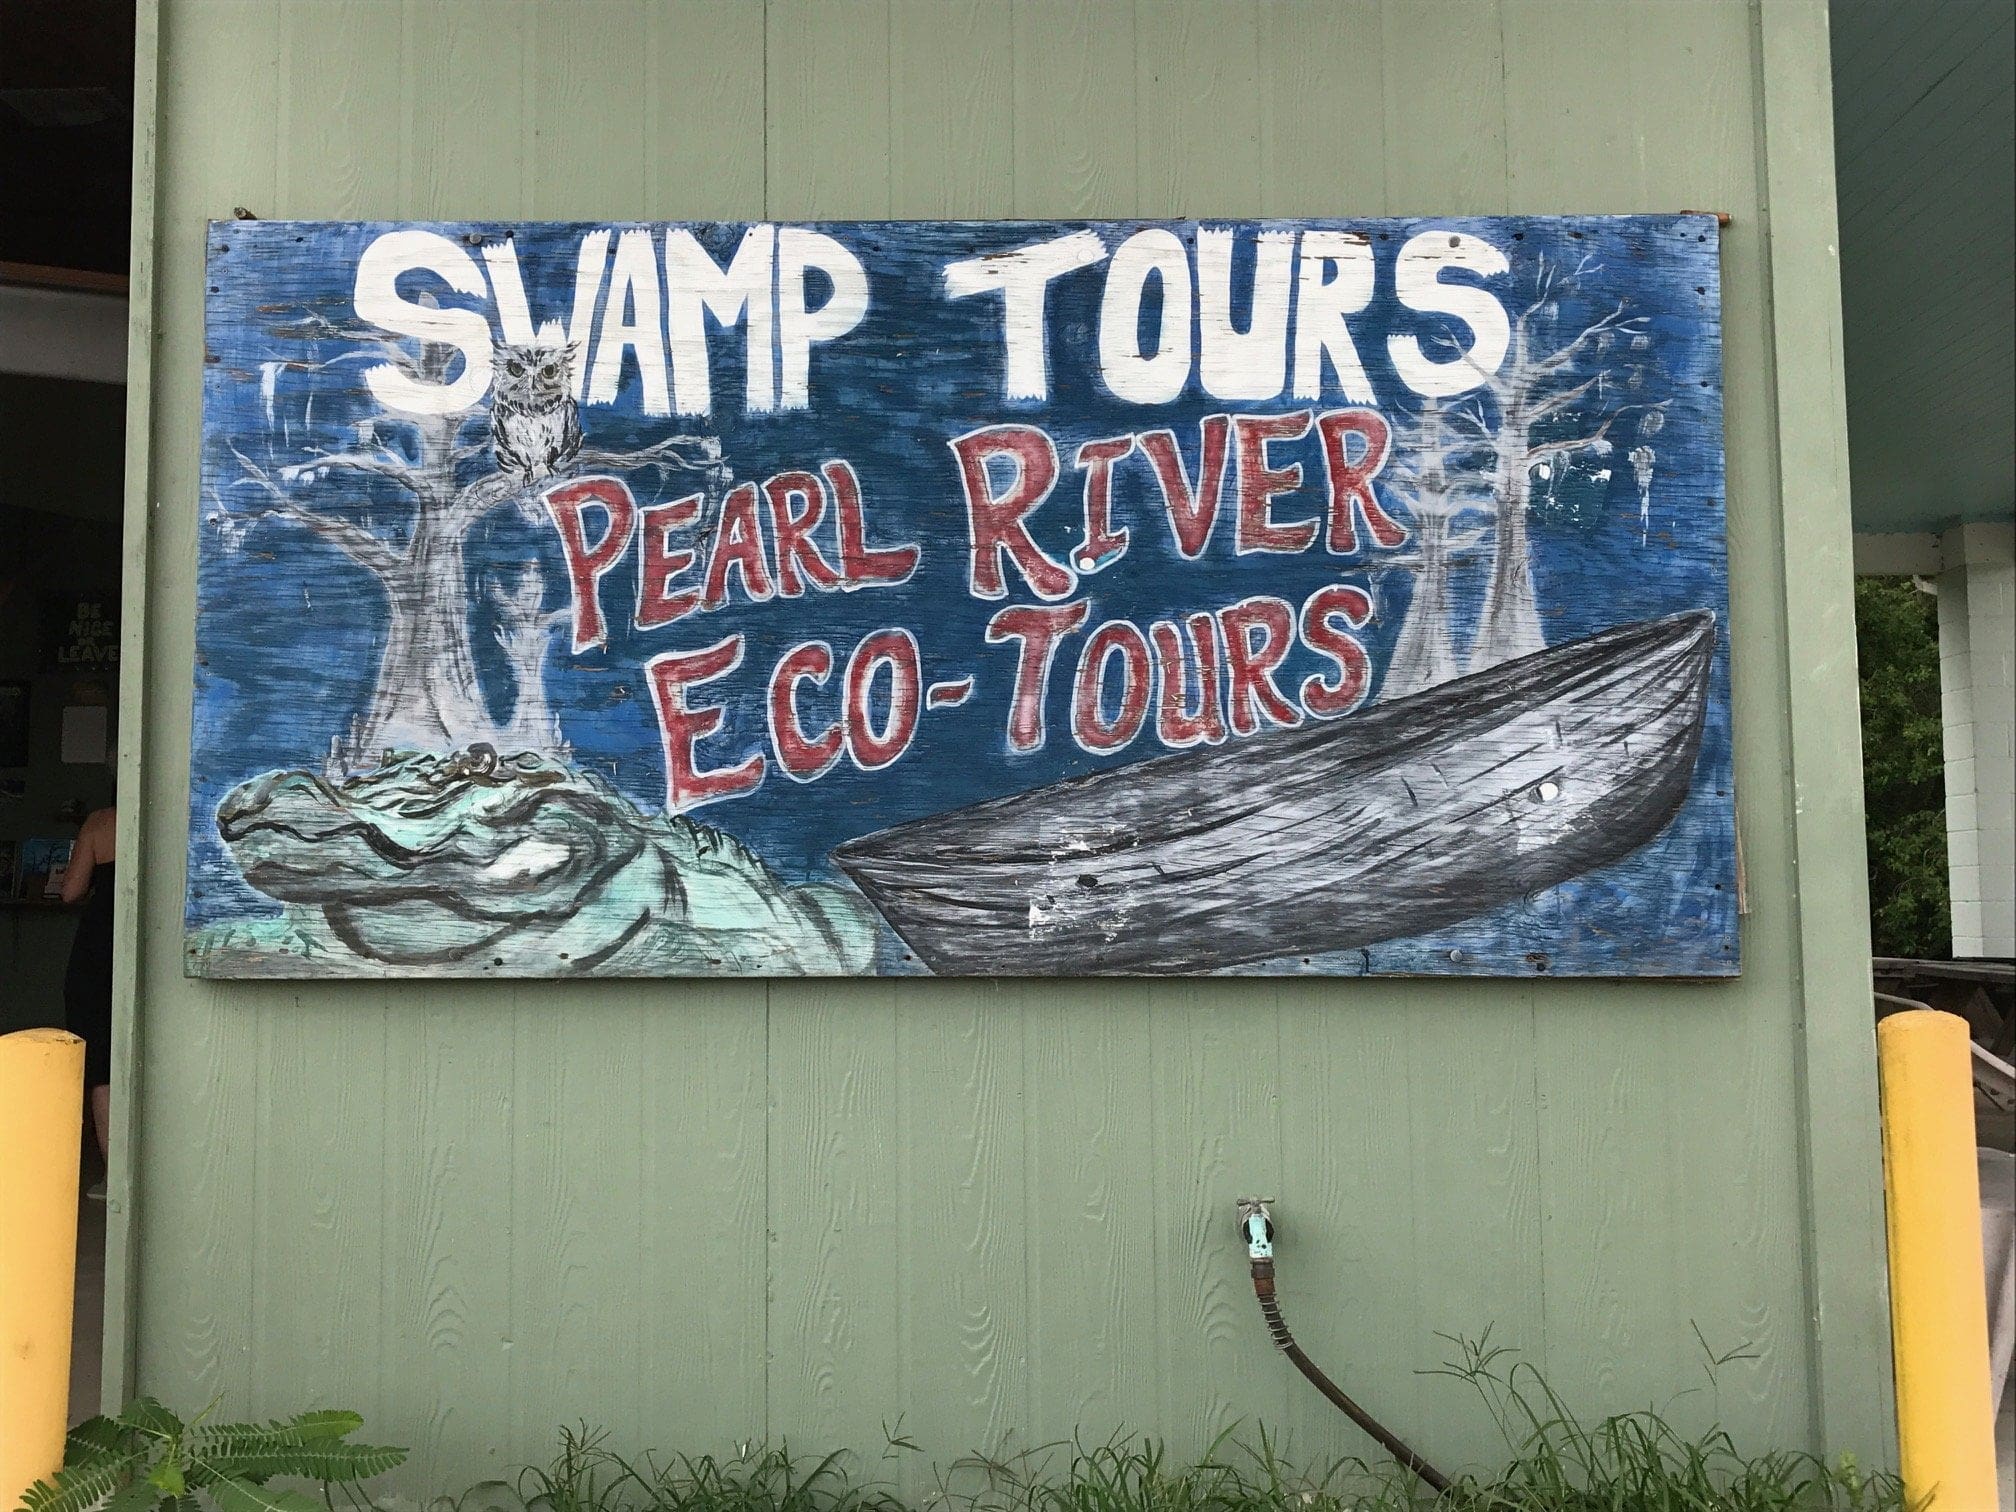 pearl river eco tours